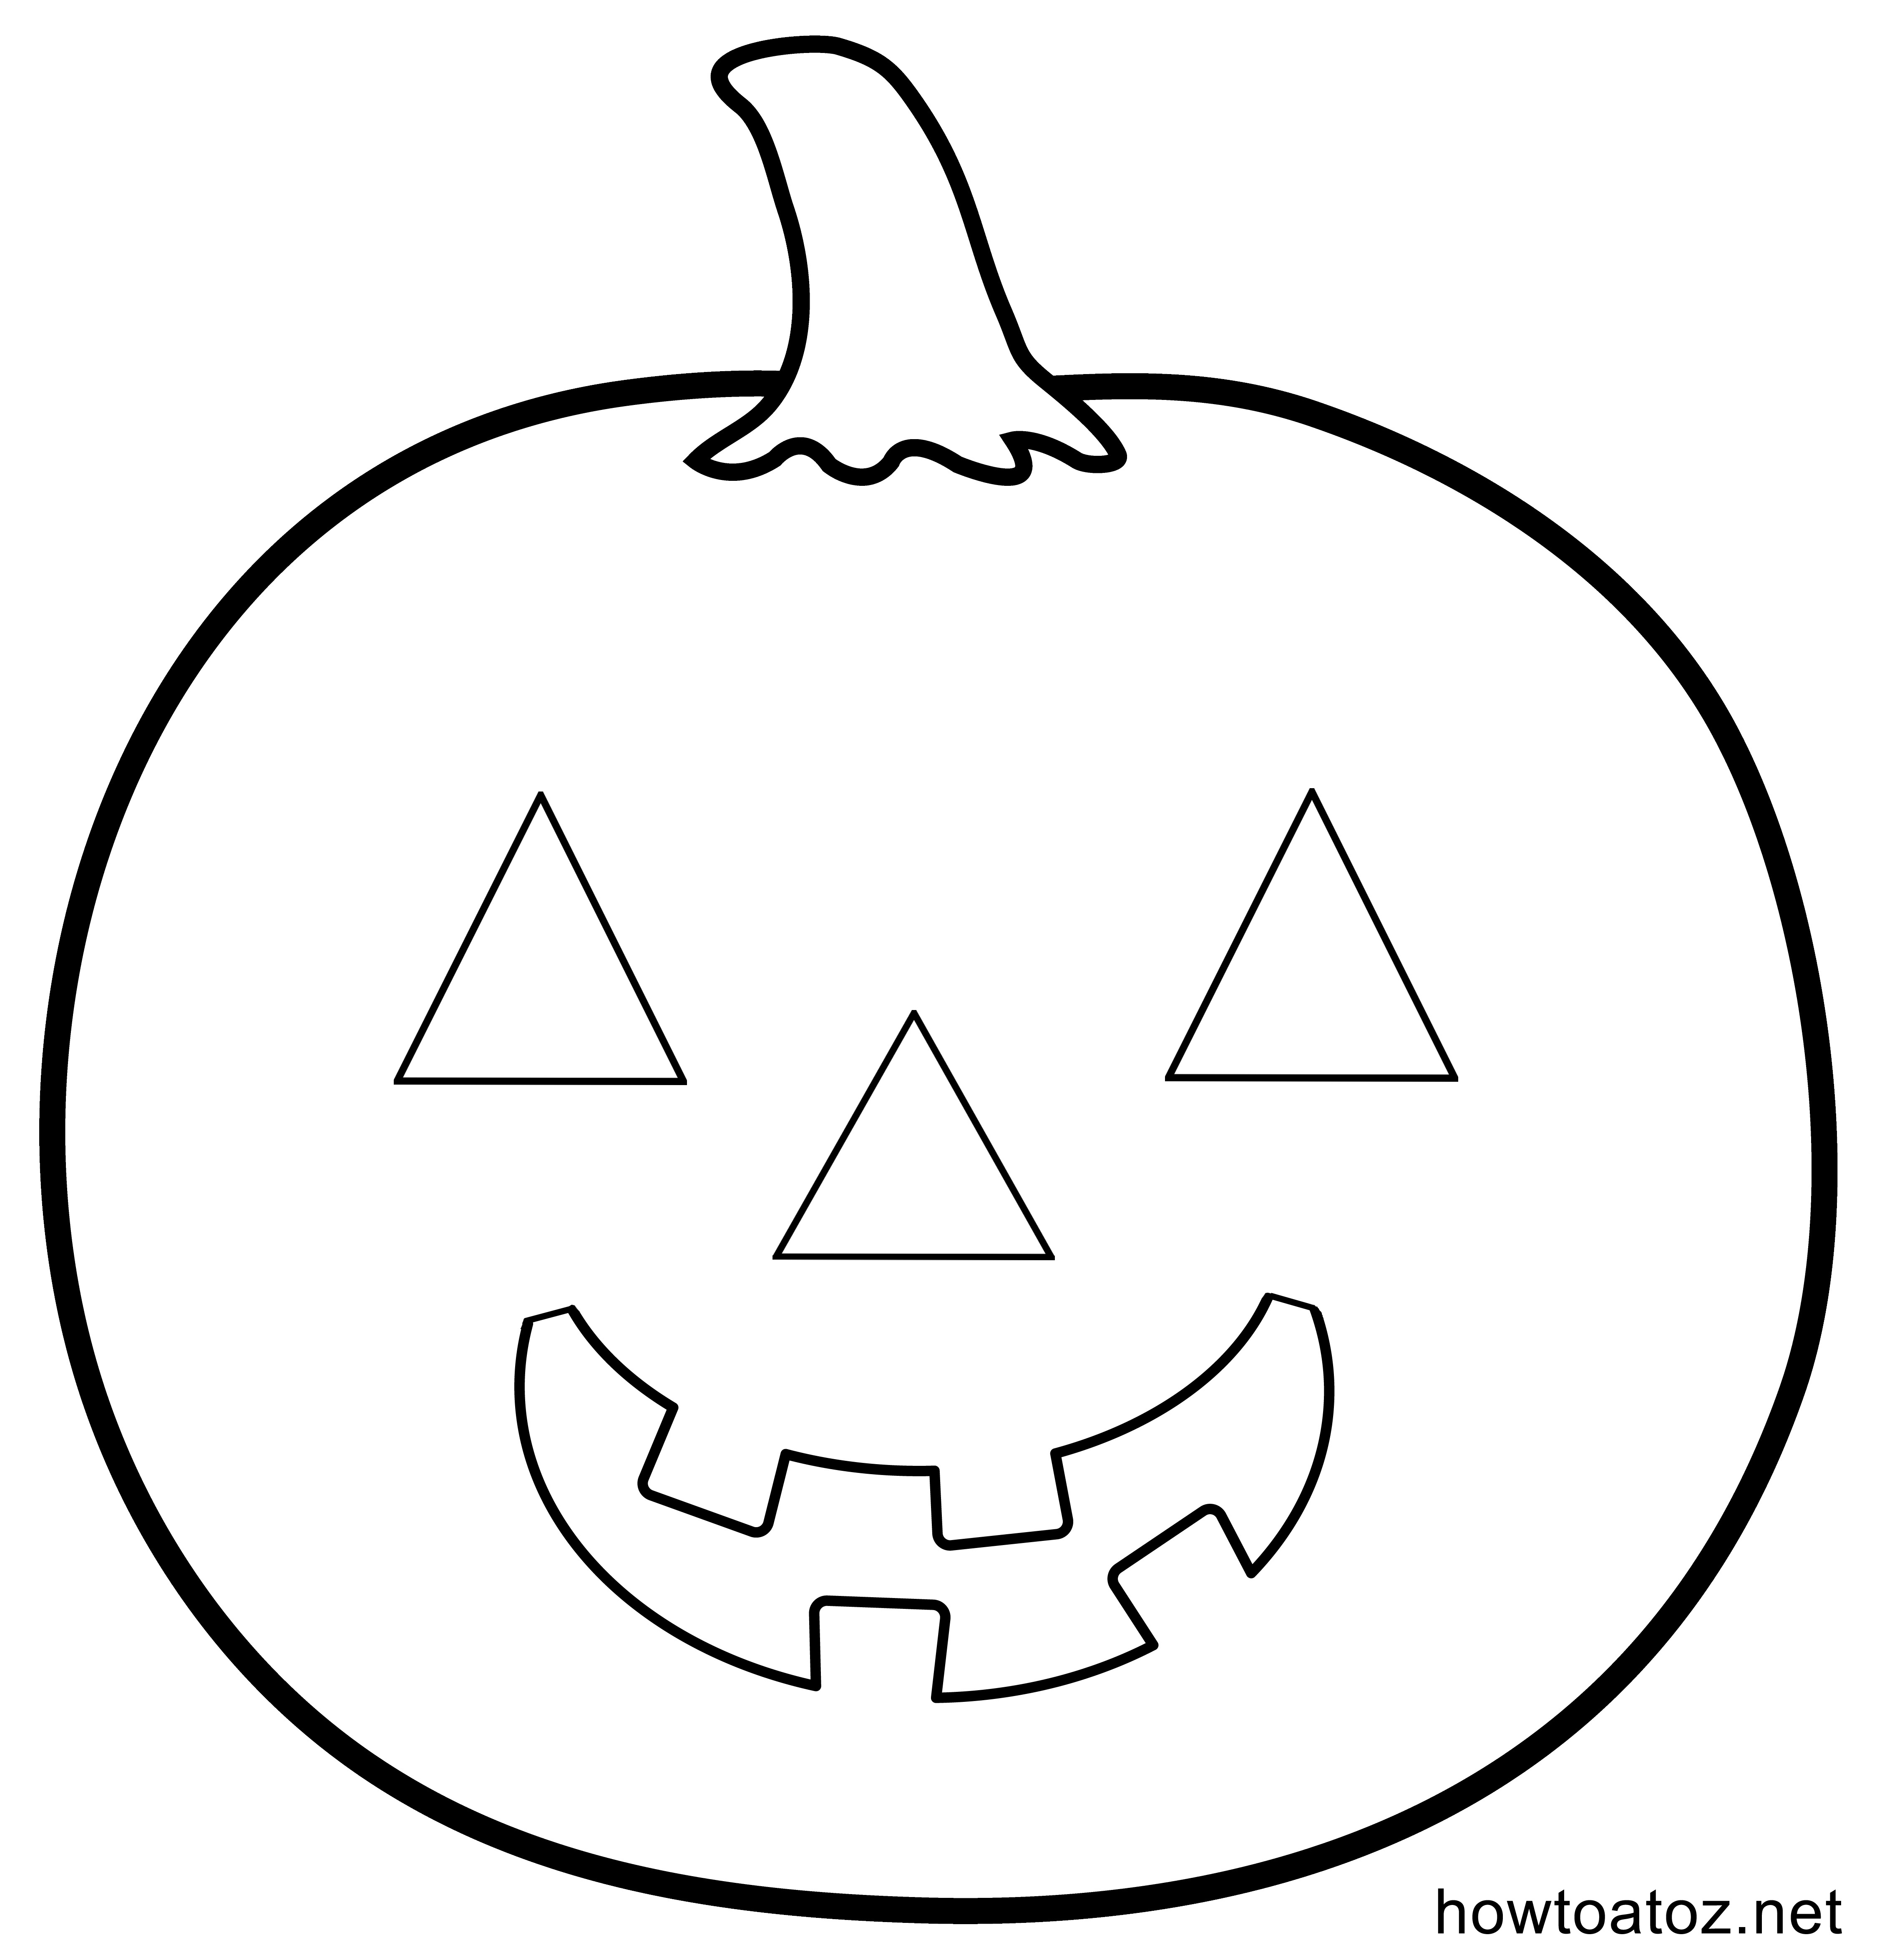 Halloween Decoration Stencils And Templates How to A to Z